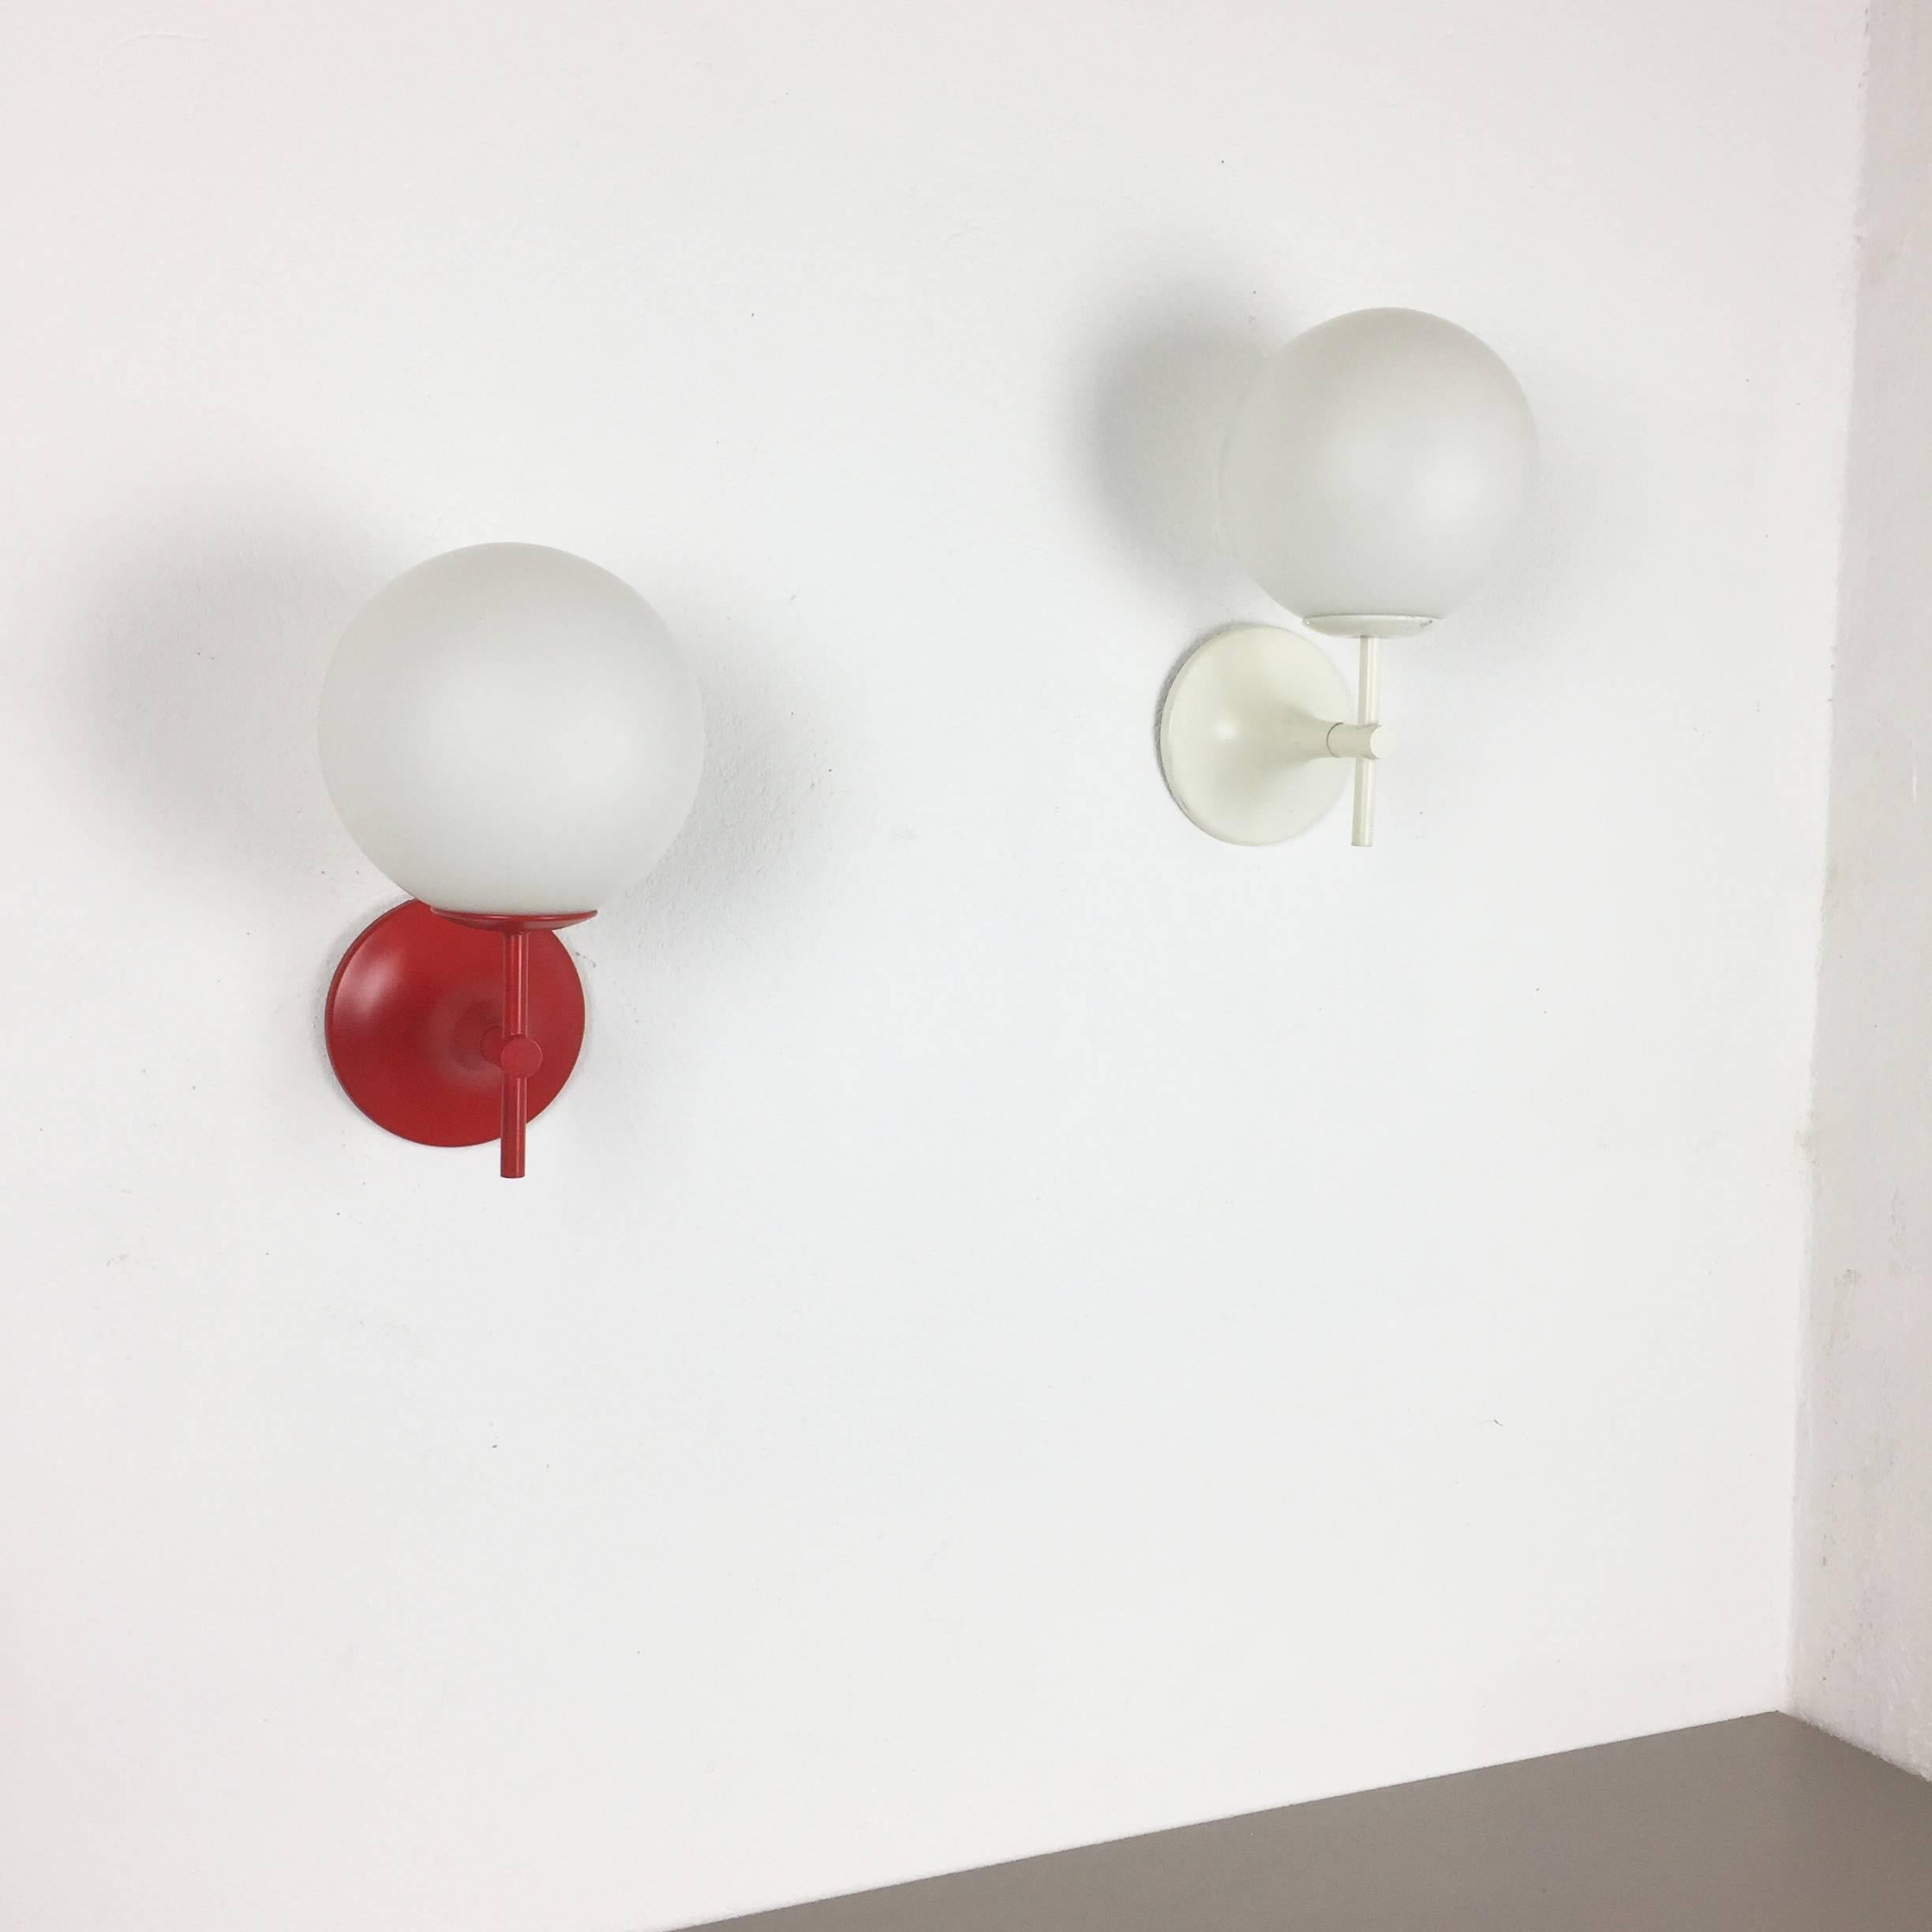 Article:

Set of two wall lights


Design:

Max Bill


Producer:

Temde, made in Switzerland


Age:

1970s


Set of two original 1970s modernist wall lights designed by Max Bill and produced by Temde, made in Switzerland. The